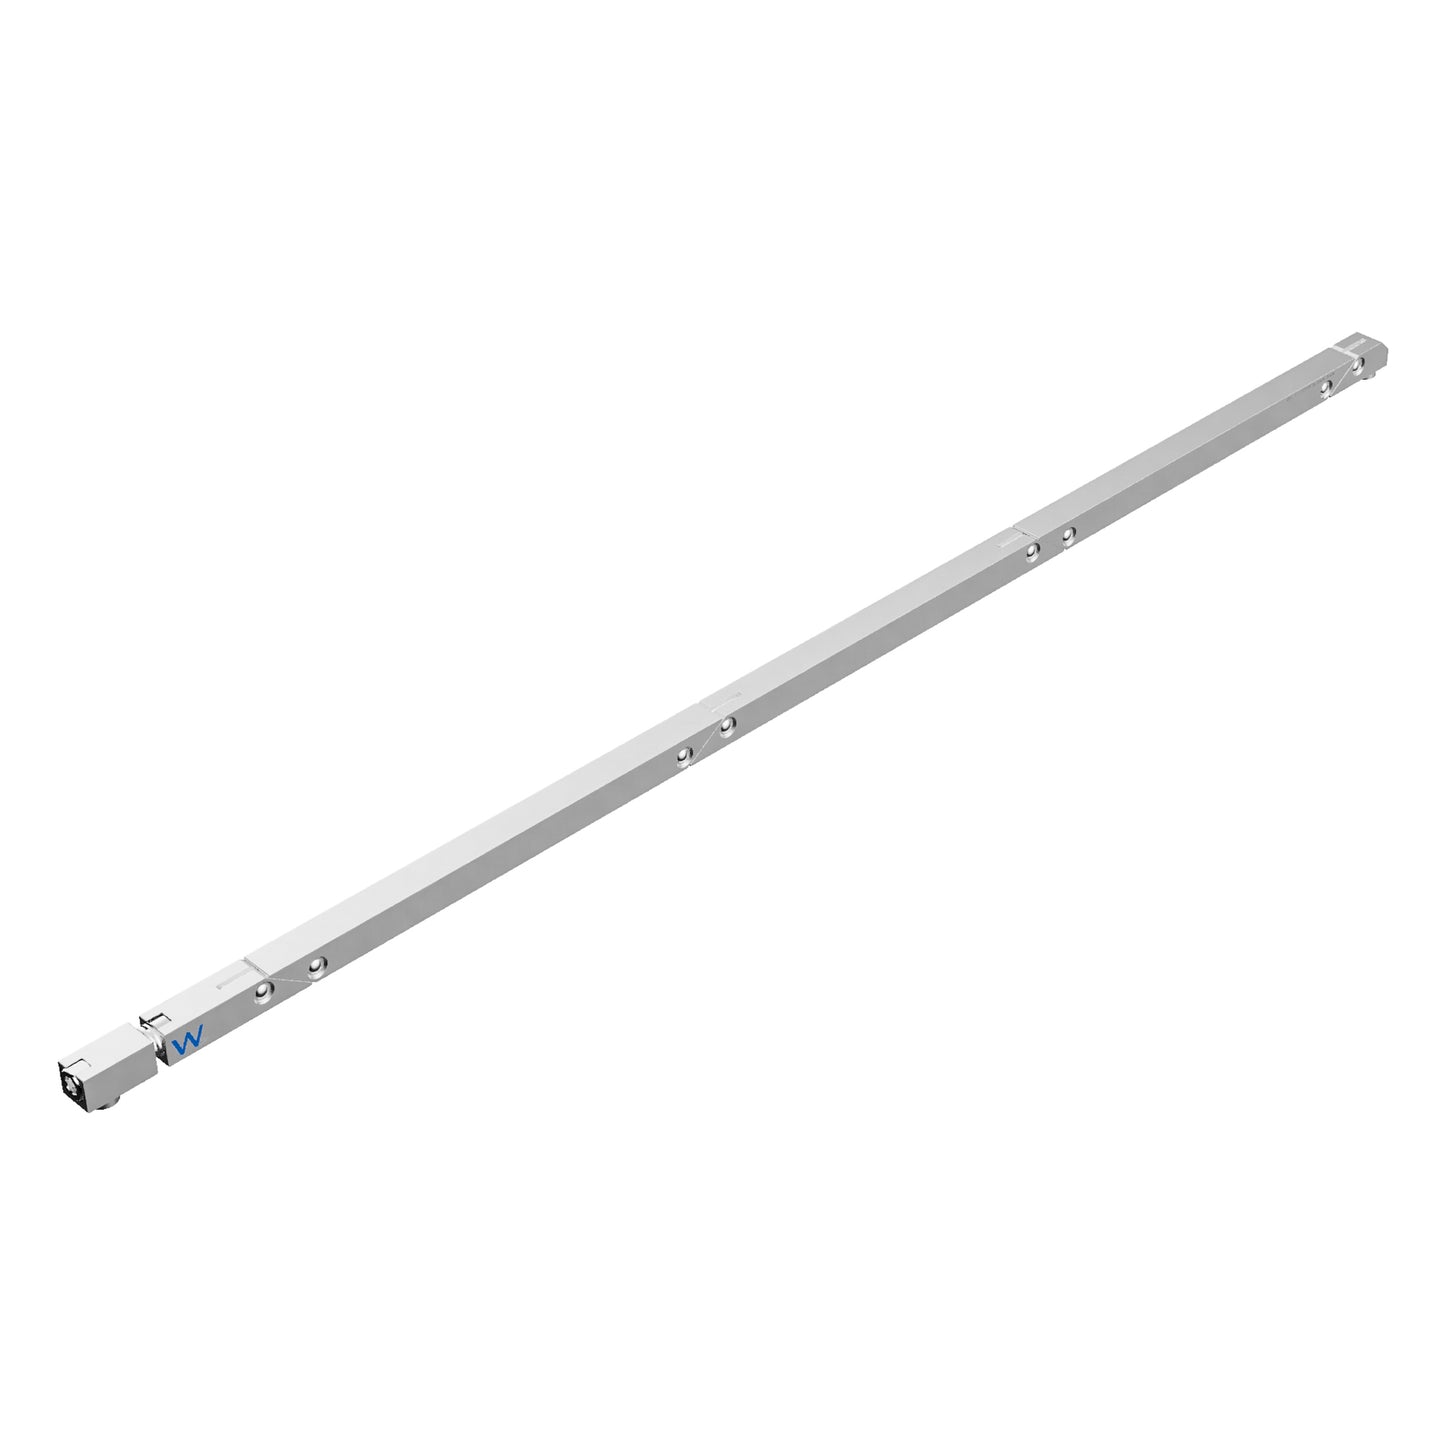 SW5-180-375-375 MAGNUM Wedgelock, segmented long rectulangular hardware component, Clear Chemical Film Finish